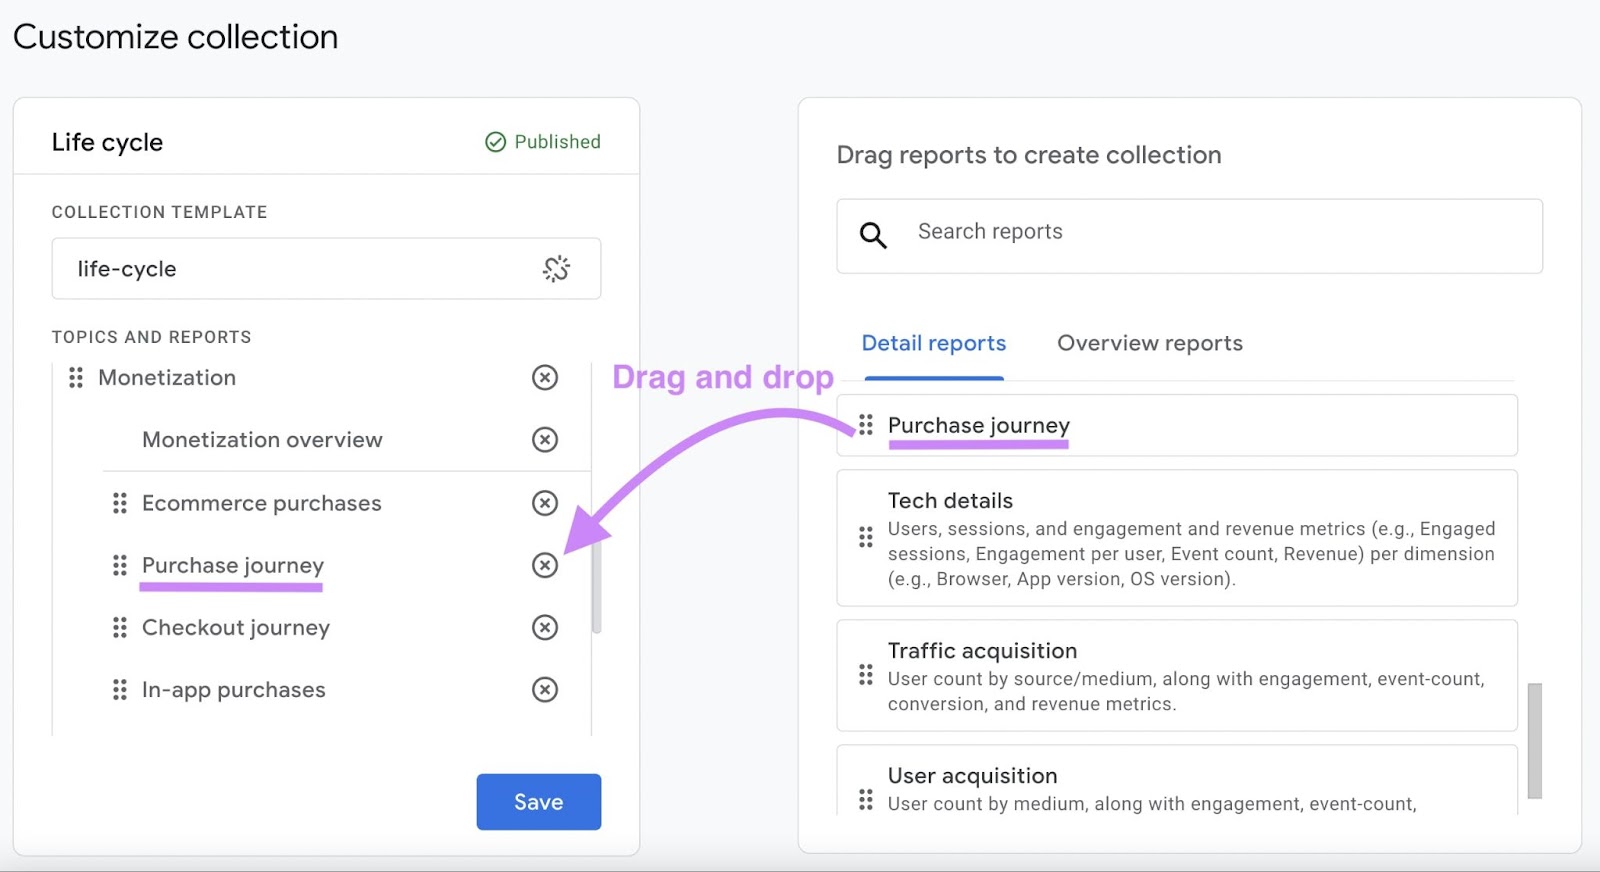 "Purchase journey" custom funnel dropped into the “Monetization” sidebar